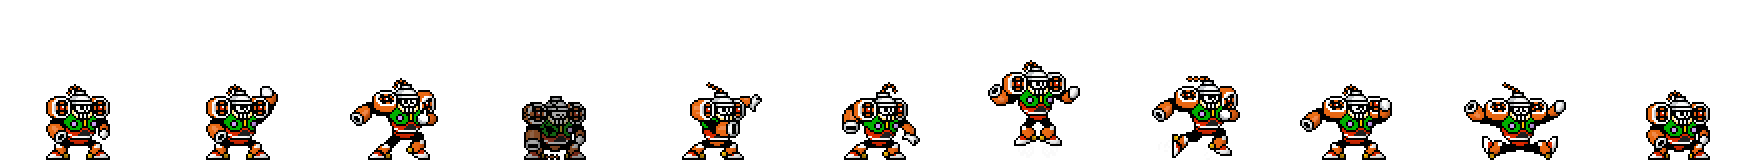 Wind Man | Taunt Sprite Right<div style="margin-top: 4px; letting-spacing: 1px; font-size: 90%; font-family: Courier New; color: rgb(159, 150, 172);">[robot:right:taunt]{wind-man}</div>